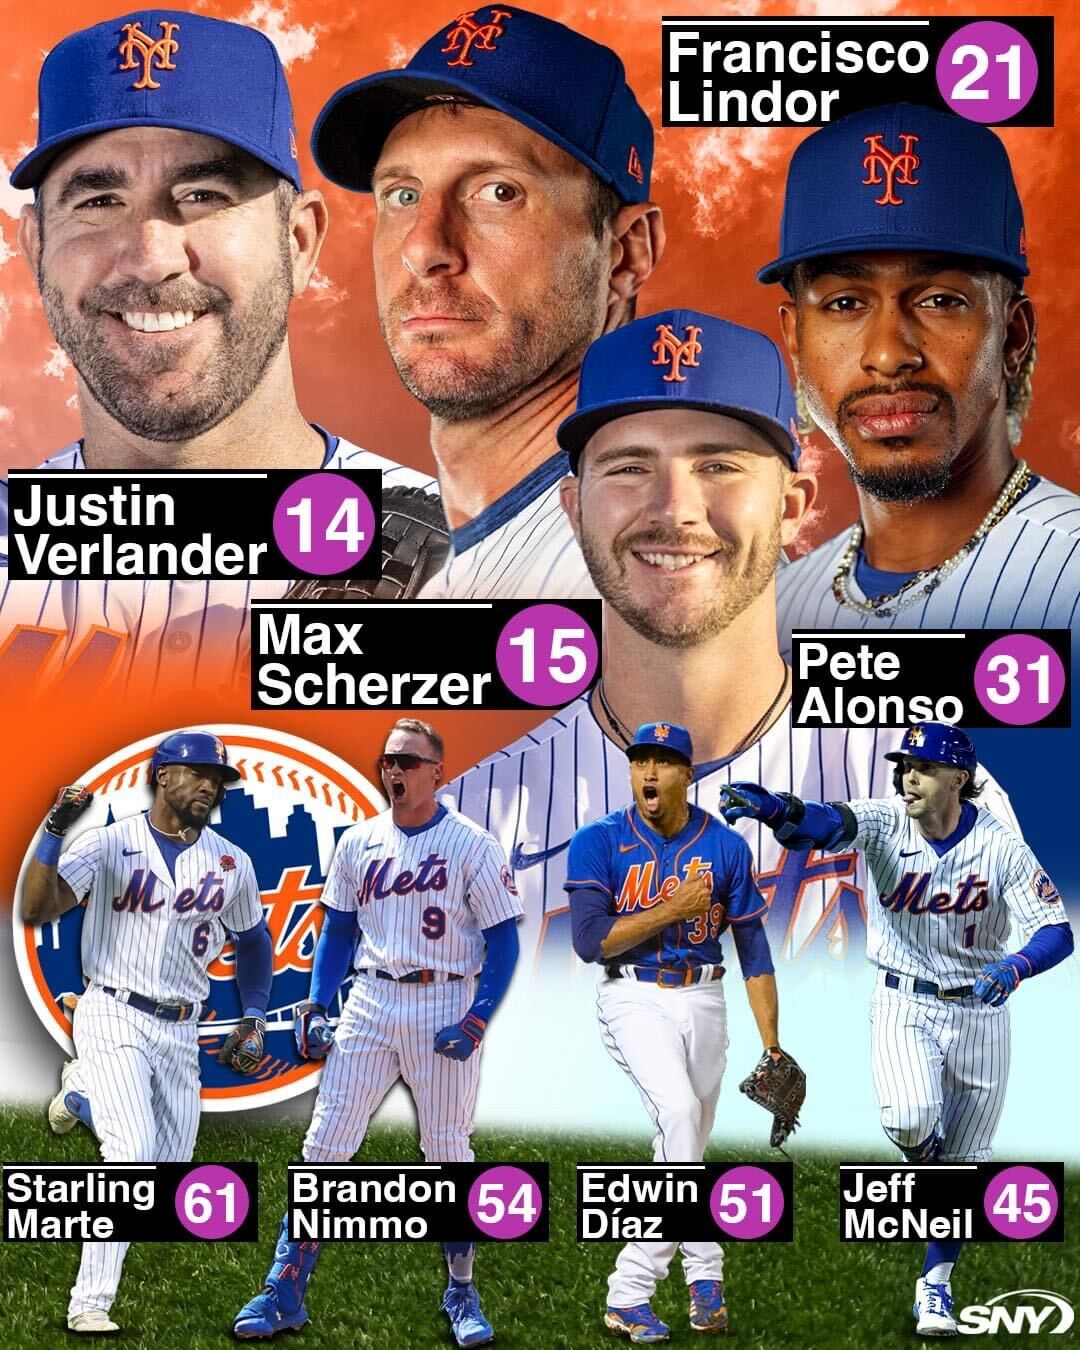 SNY Mets on X: The Mets had 8 guys land on MLB's Top 100 Players Right Now  for 2023, putting them in a tie for the highest number of players on the